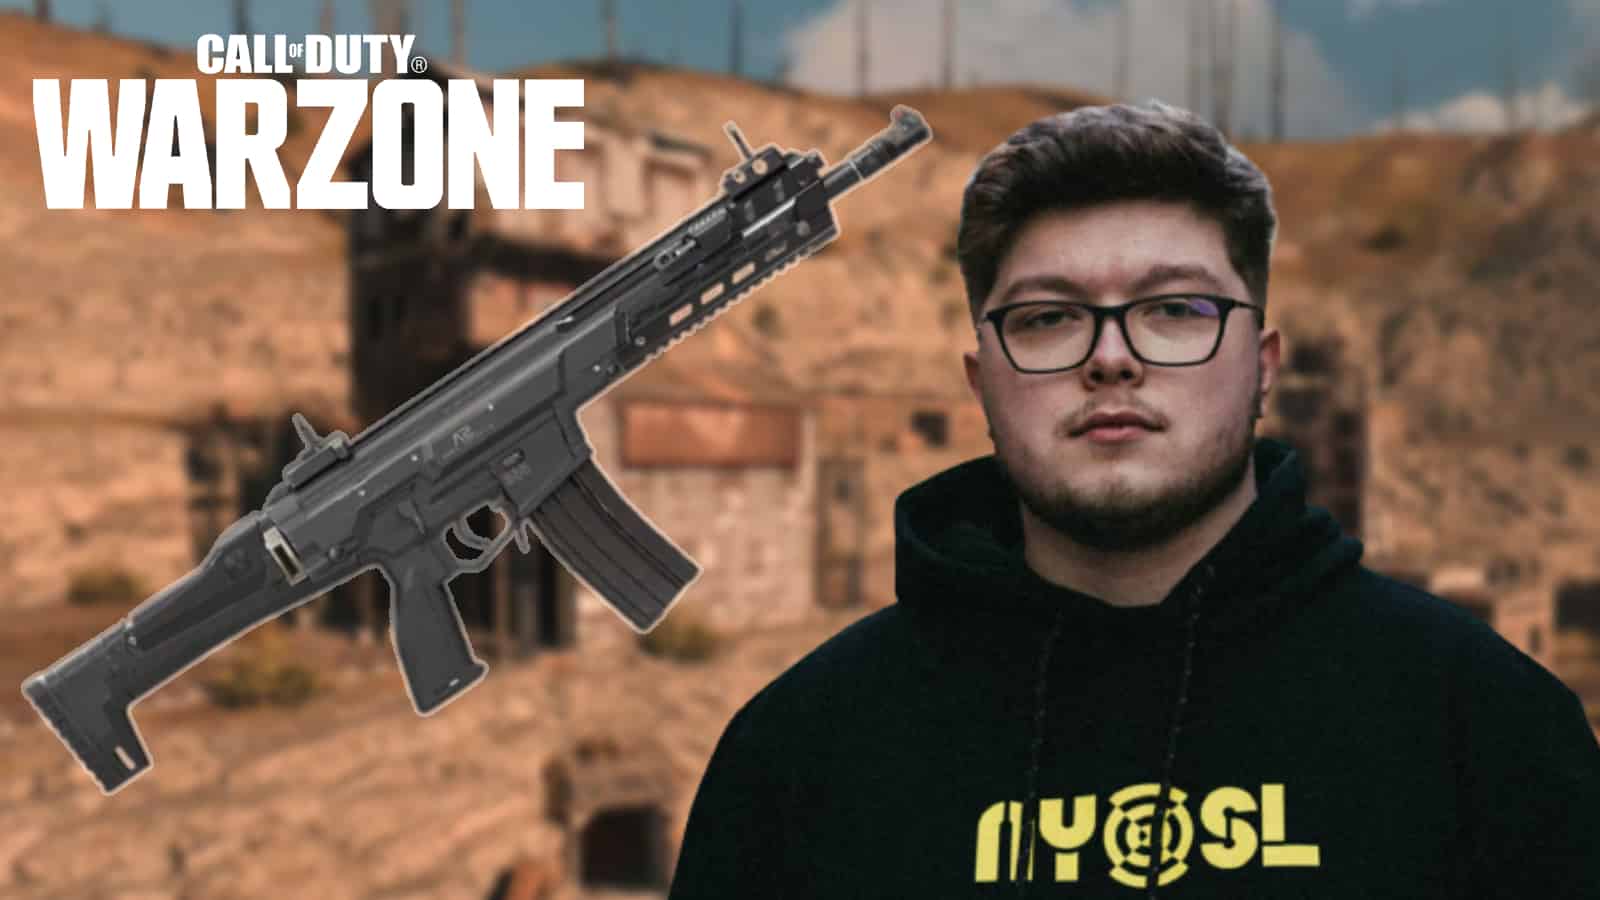 Aydan stunned by TikTok's viral Warzone Kilo loadout: "The hipfire is nuts!"